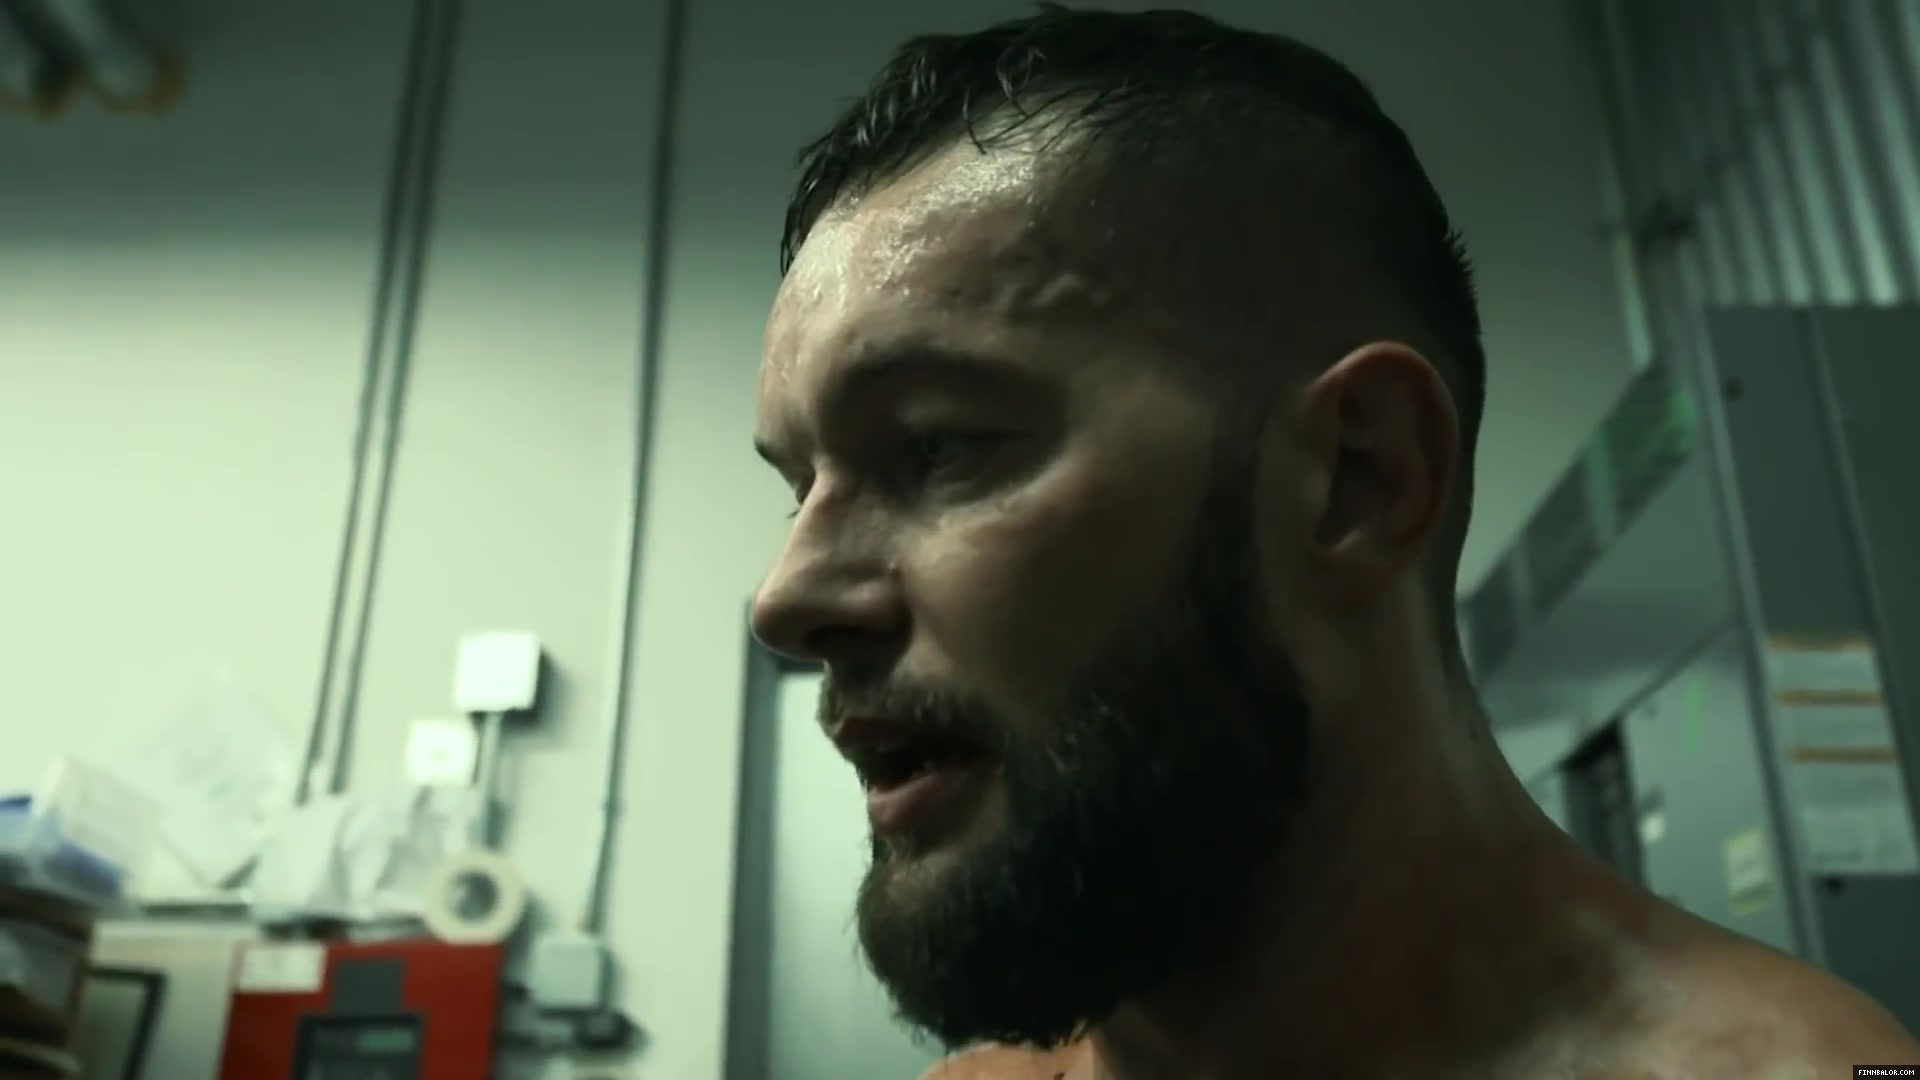 Finn_Balor___The_Rising_of_the_Prince_in_NXT_260.jpg